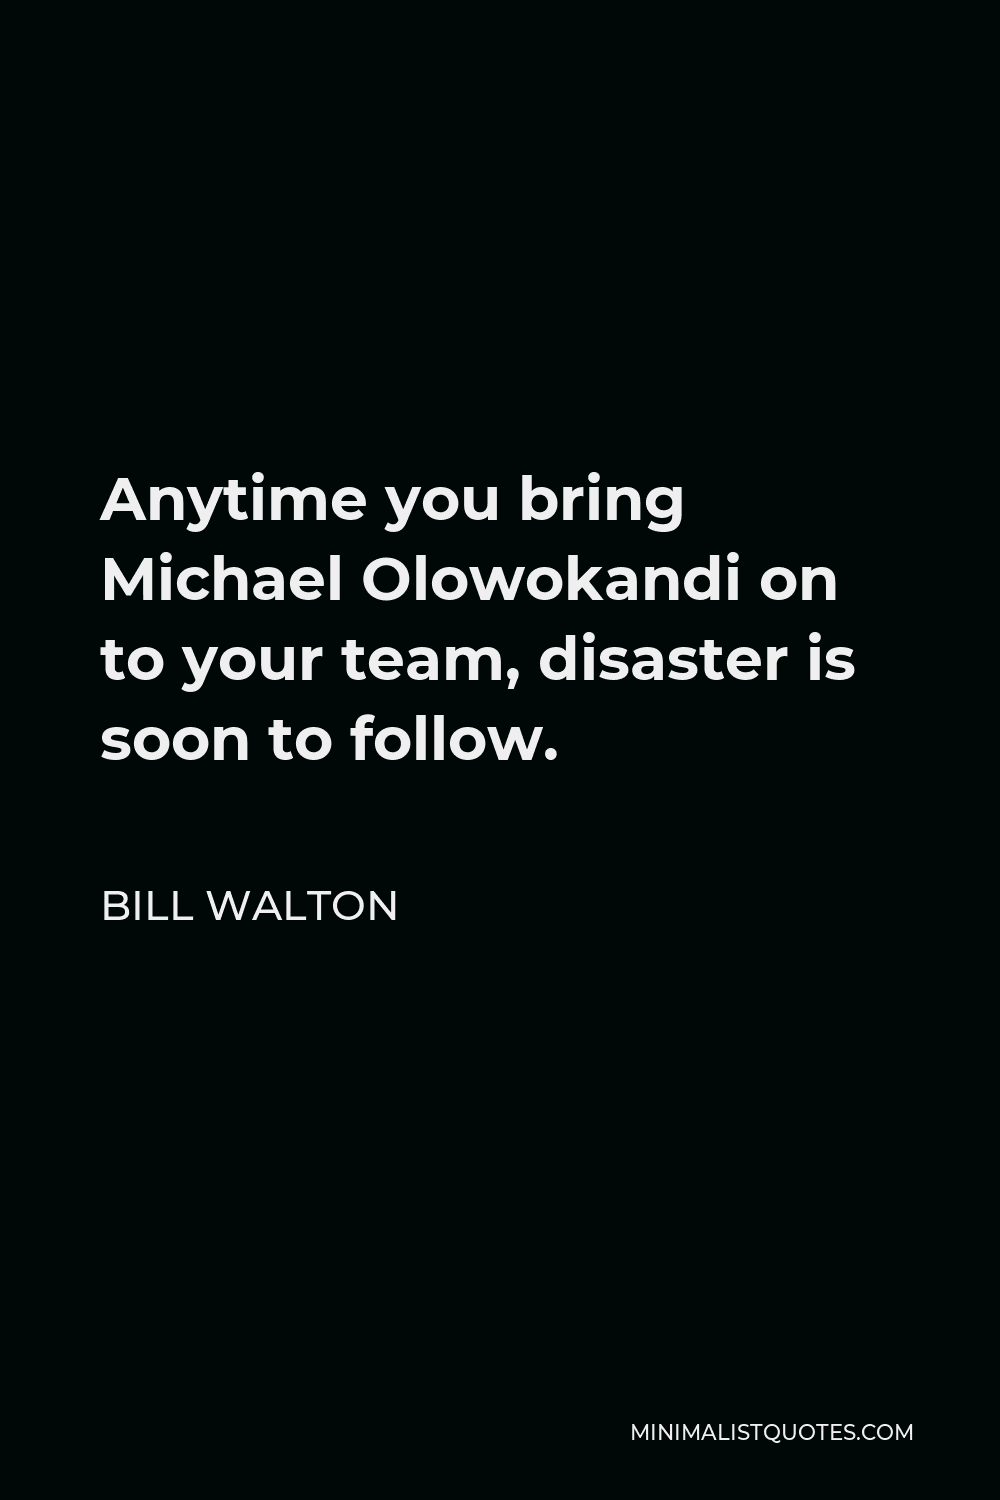 Bill Walton Quote - Anytime you bring Michael Olowokandi on to your team, disaster is soon to follow.